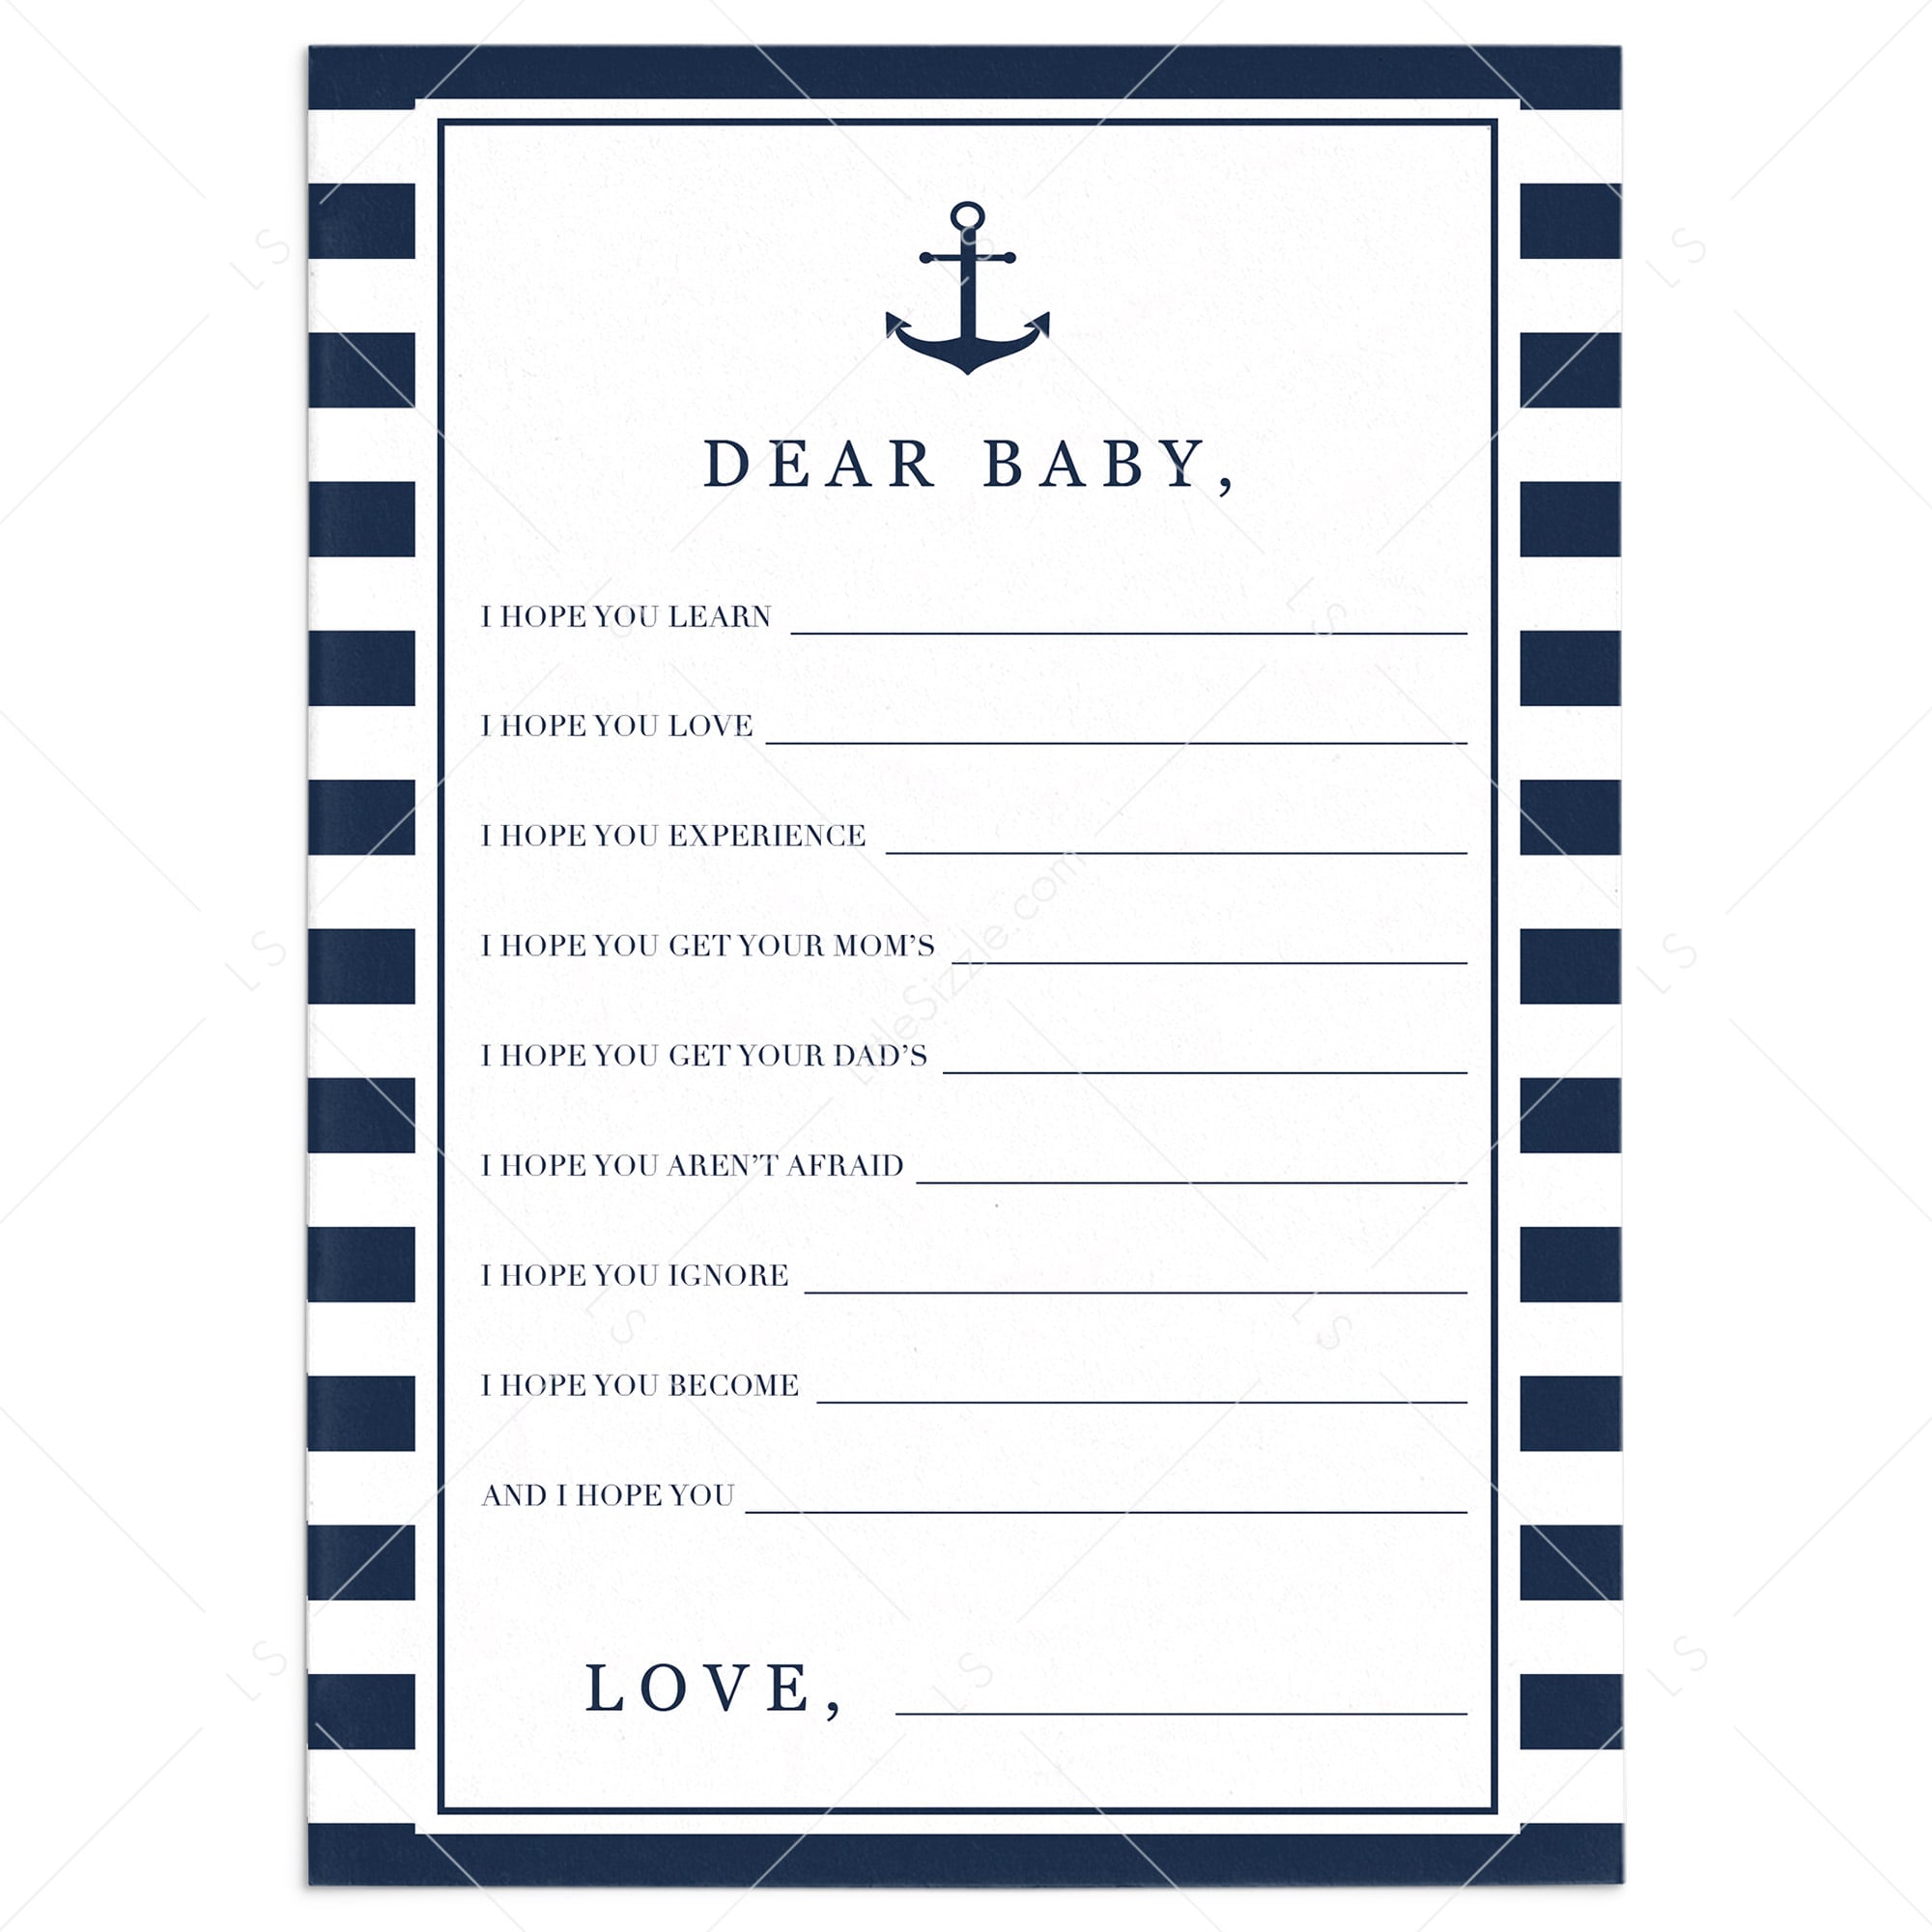 Printable wishes for the new baby boy by LittleSizzle